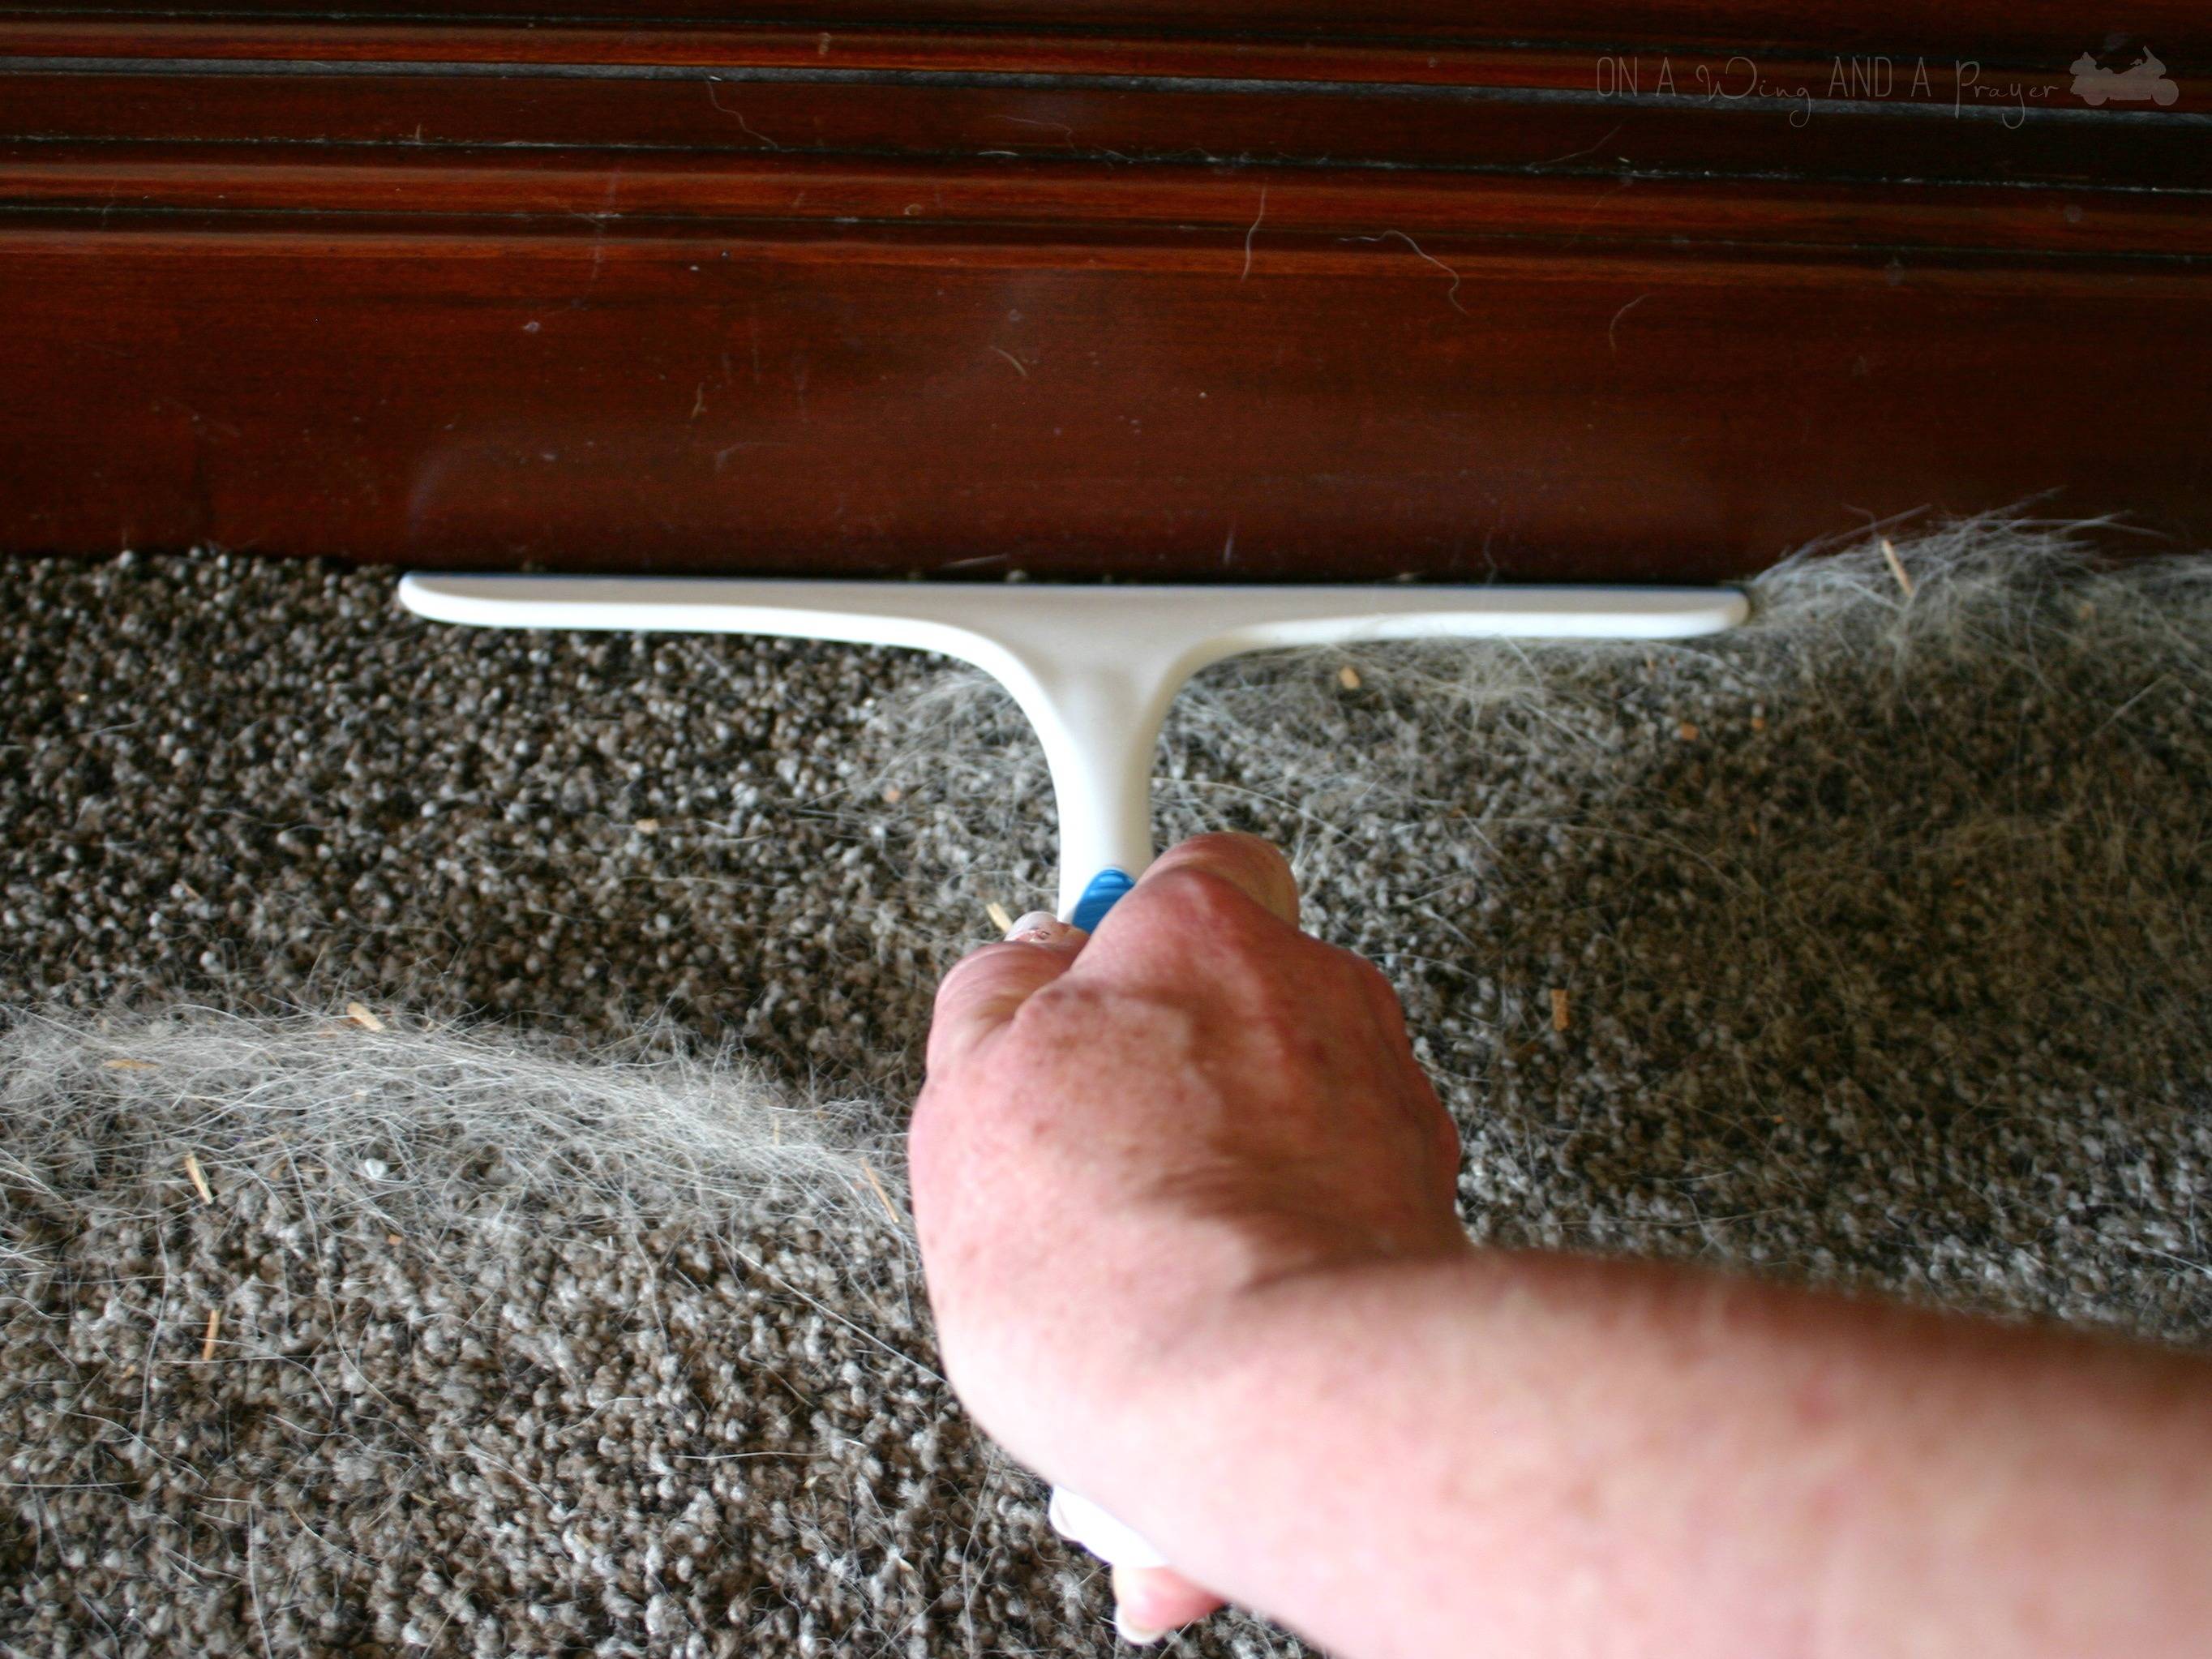 9 Ways to Use a Squeegee to Clean Glue Sticks and Gumdrops